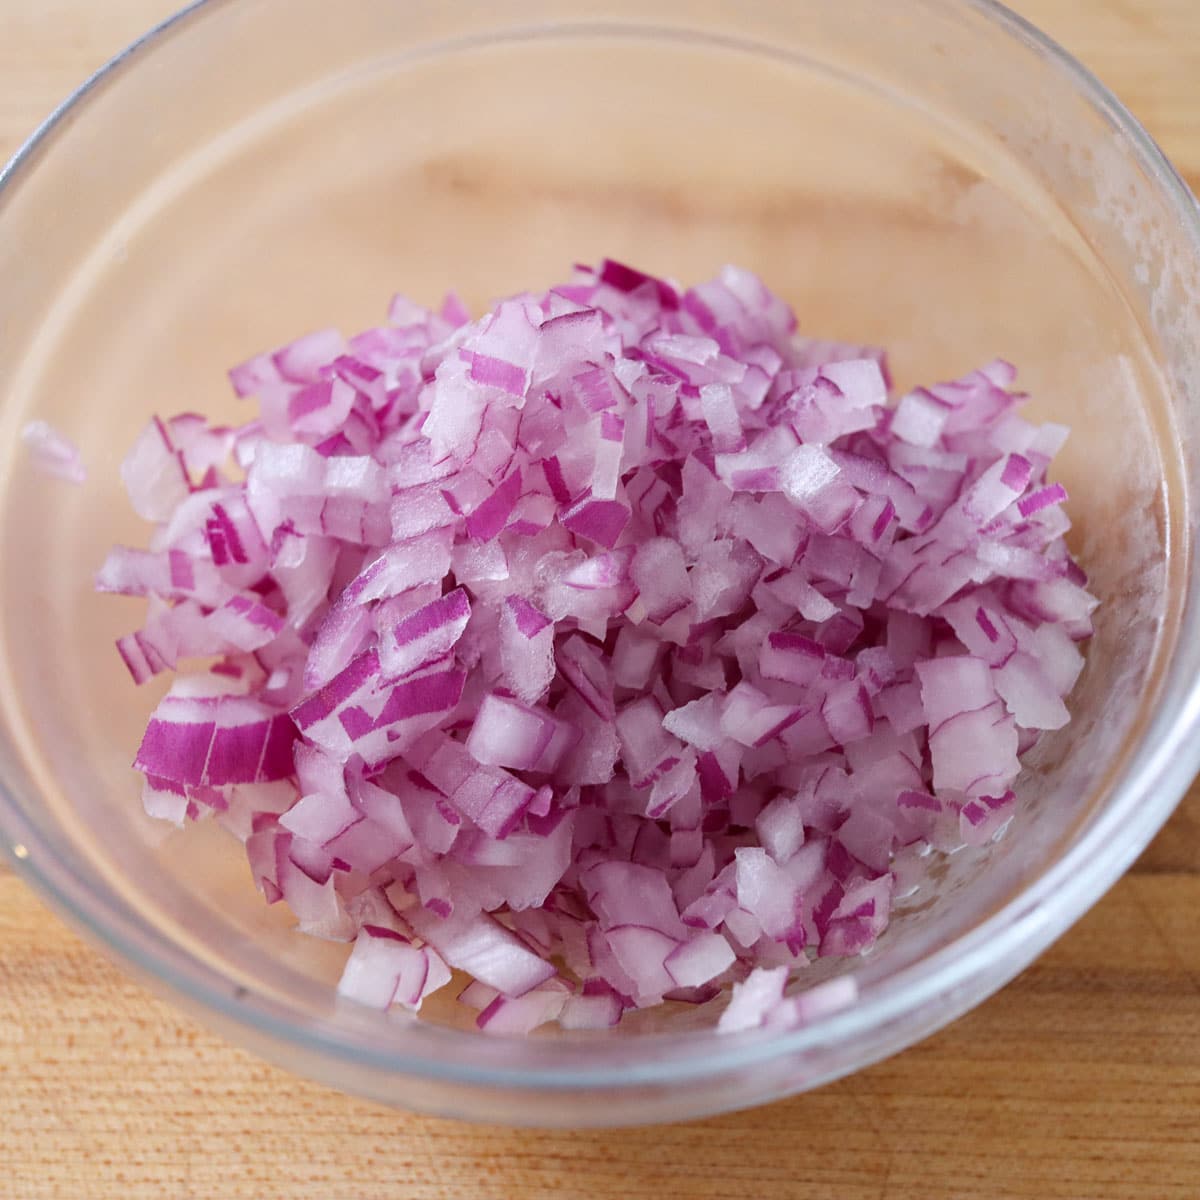 Diced red onion in a bowl